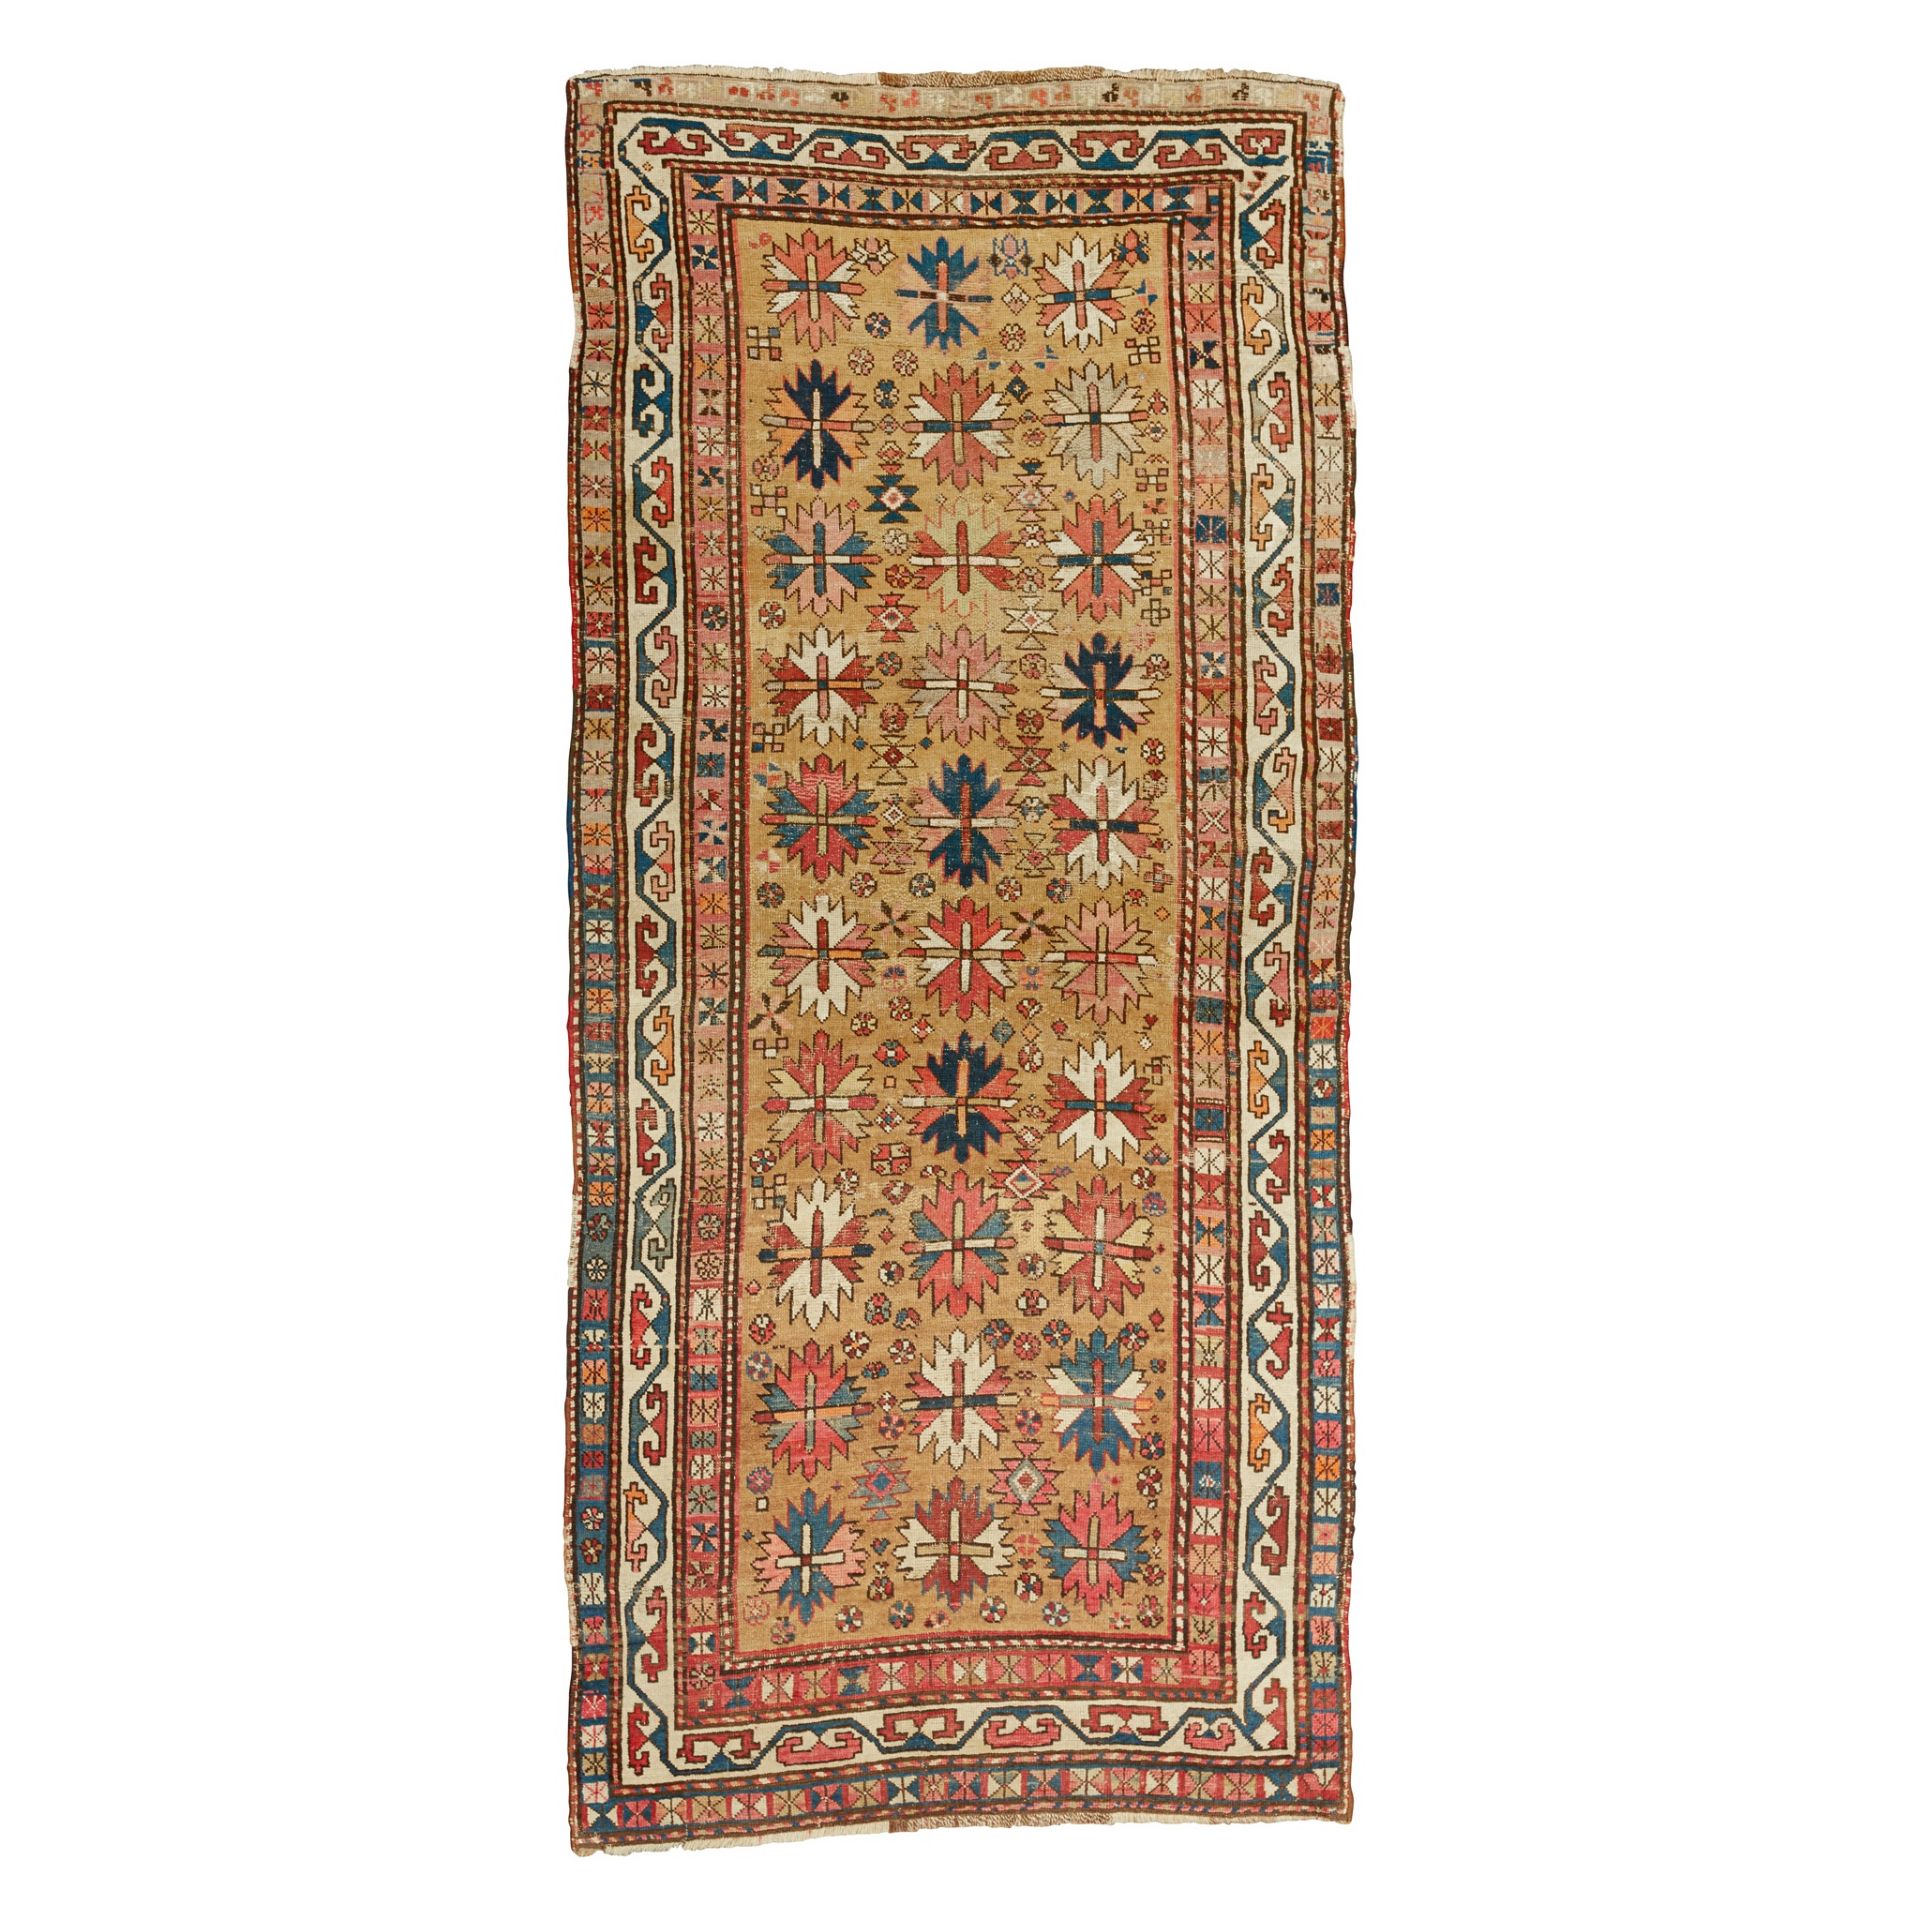 SOUTH CAUCASIAN RUG LATE 19TH/EARLY 20TH CENTURY